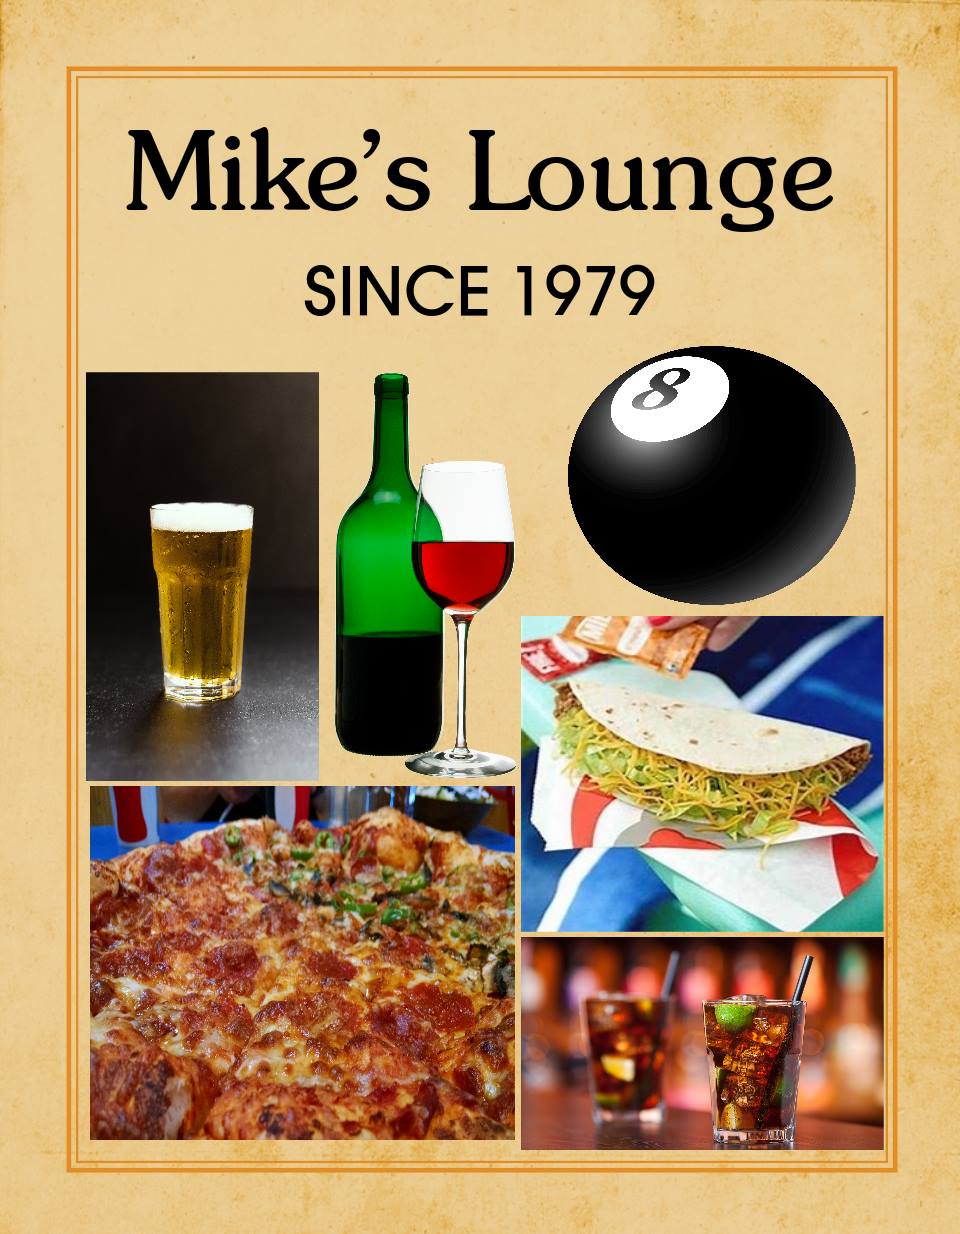 Mike's Lounge's Image